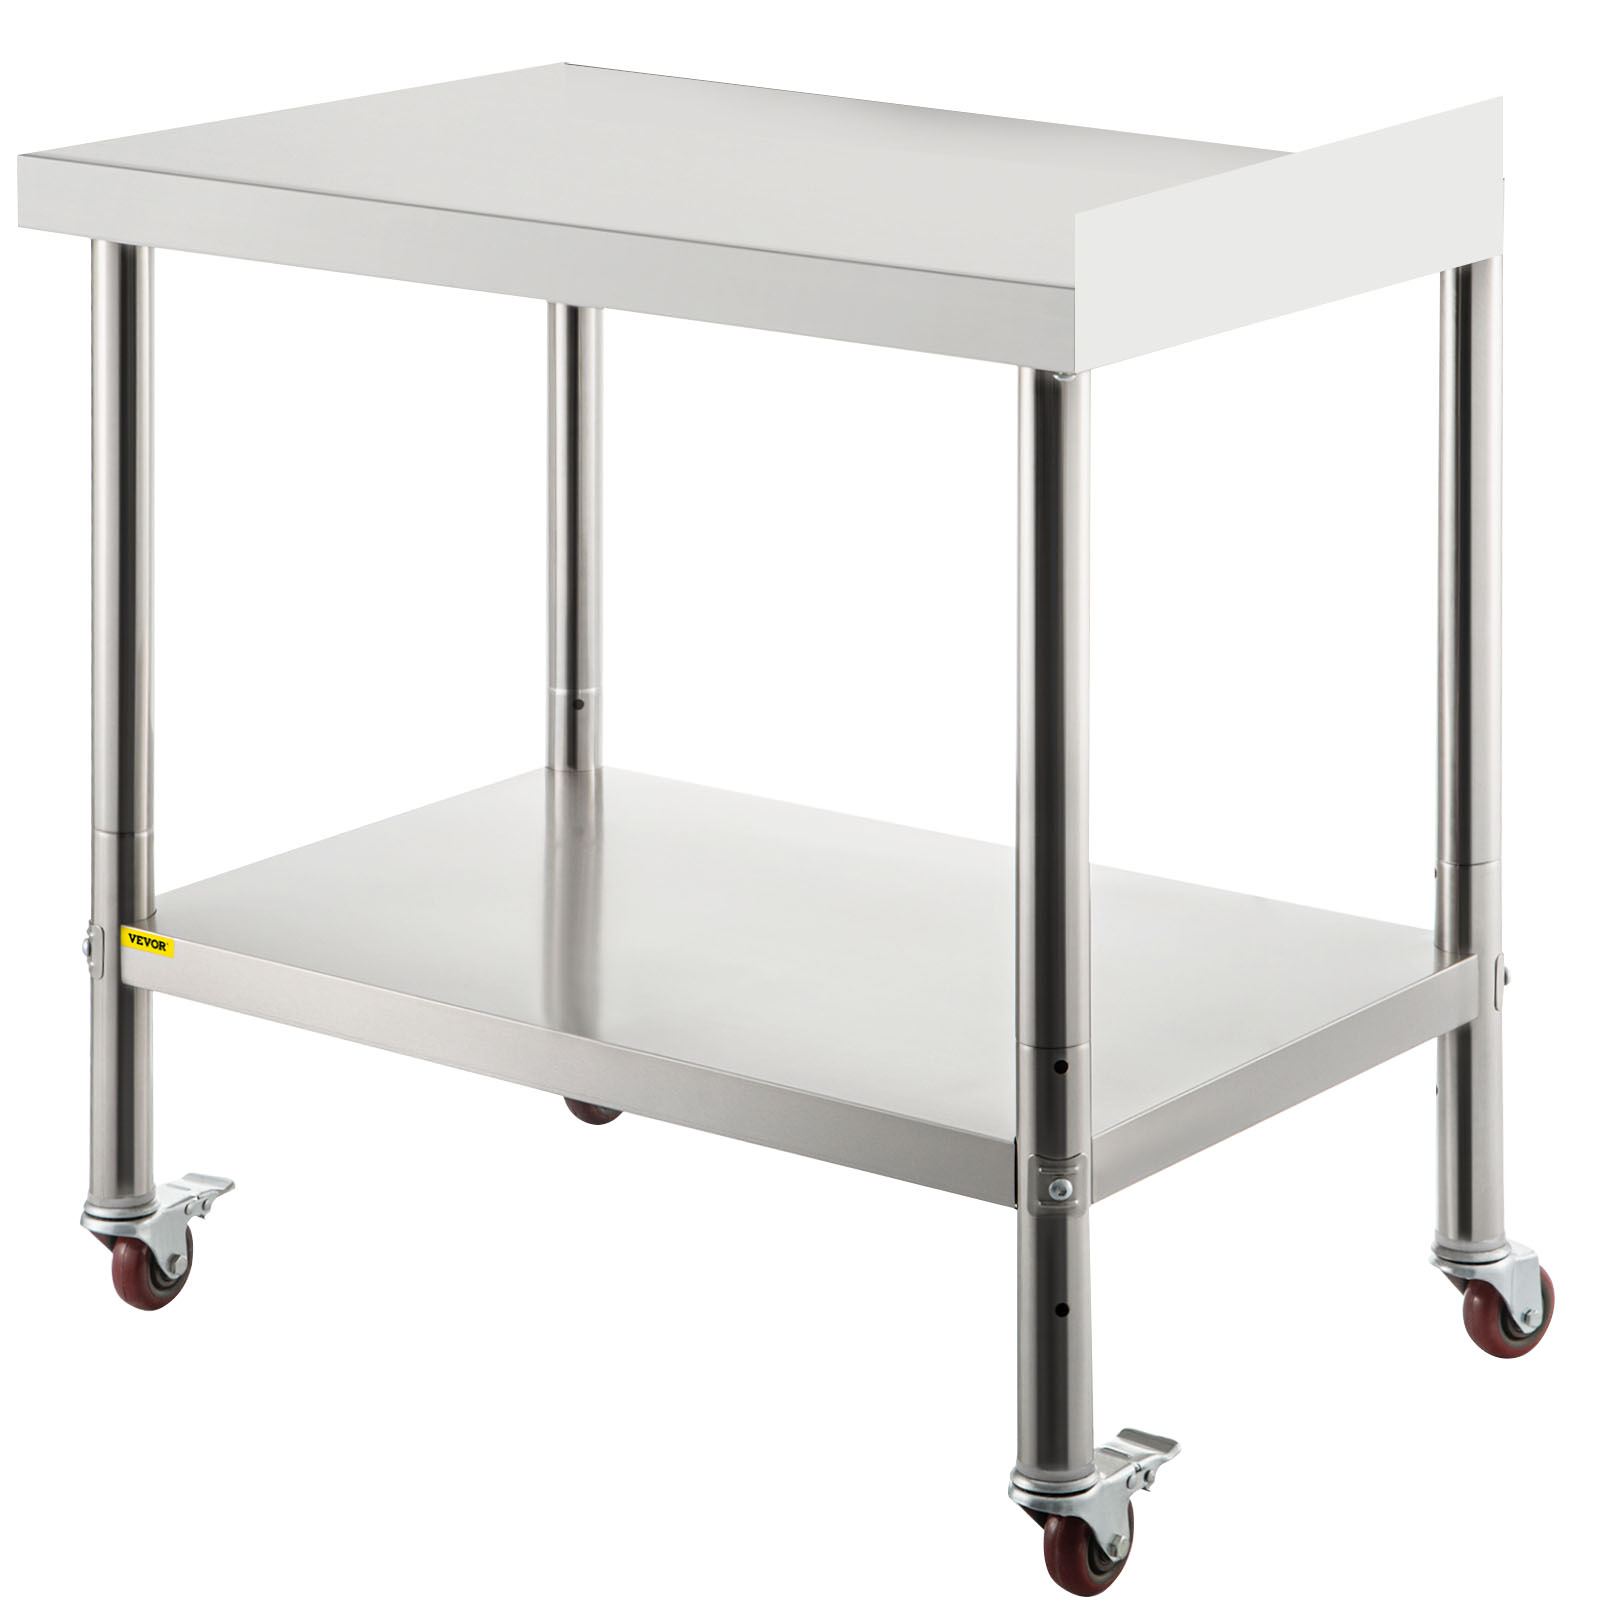 VEVOR Stainless Steel Work Prep Table Kitchen Work Table 24x15in w/ 4 Casters от Vevor Many GEOs